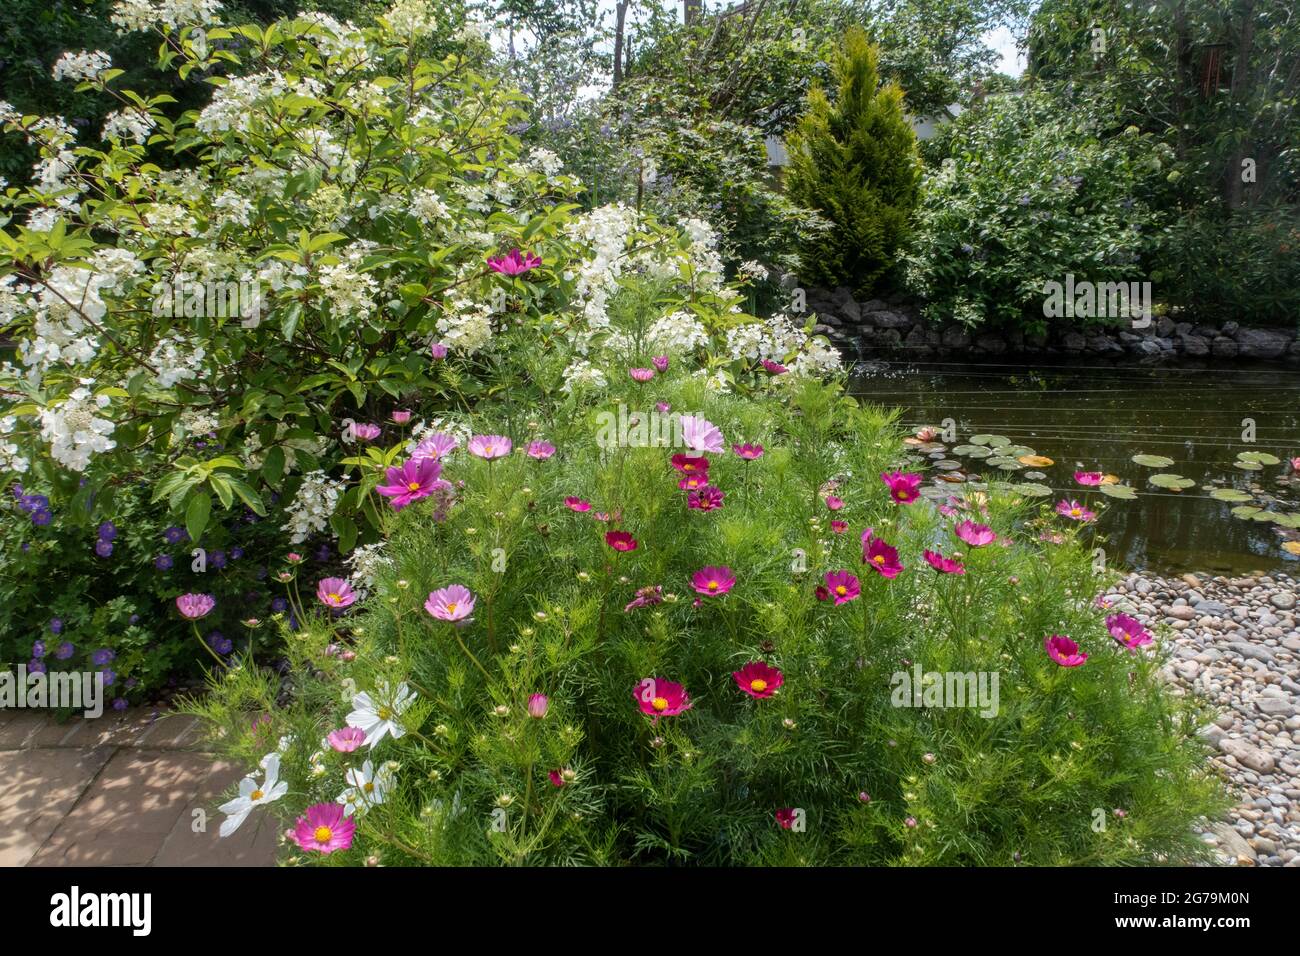 Pots filled with cosmos beside white hydrangea paniculata 'White Moth', white moth hydrangea and geranium roxanne, by a garden pond. Stock Photo